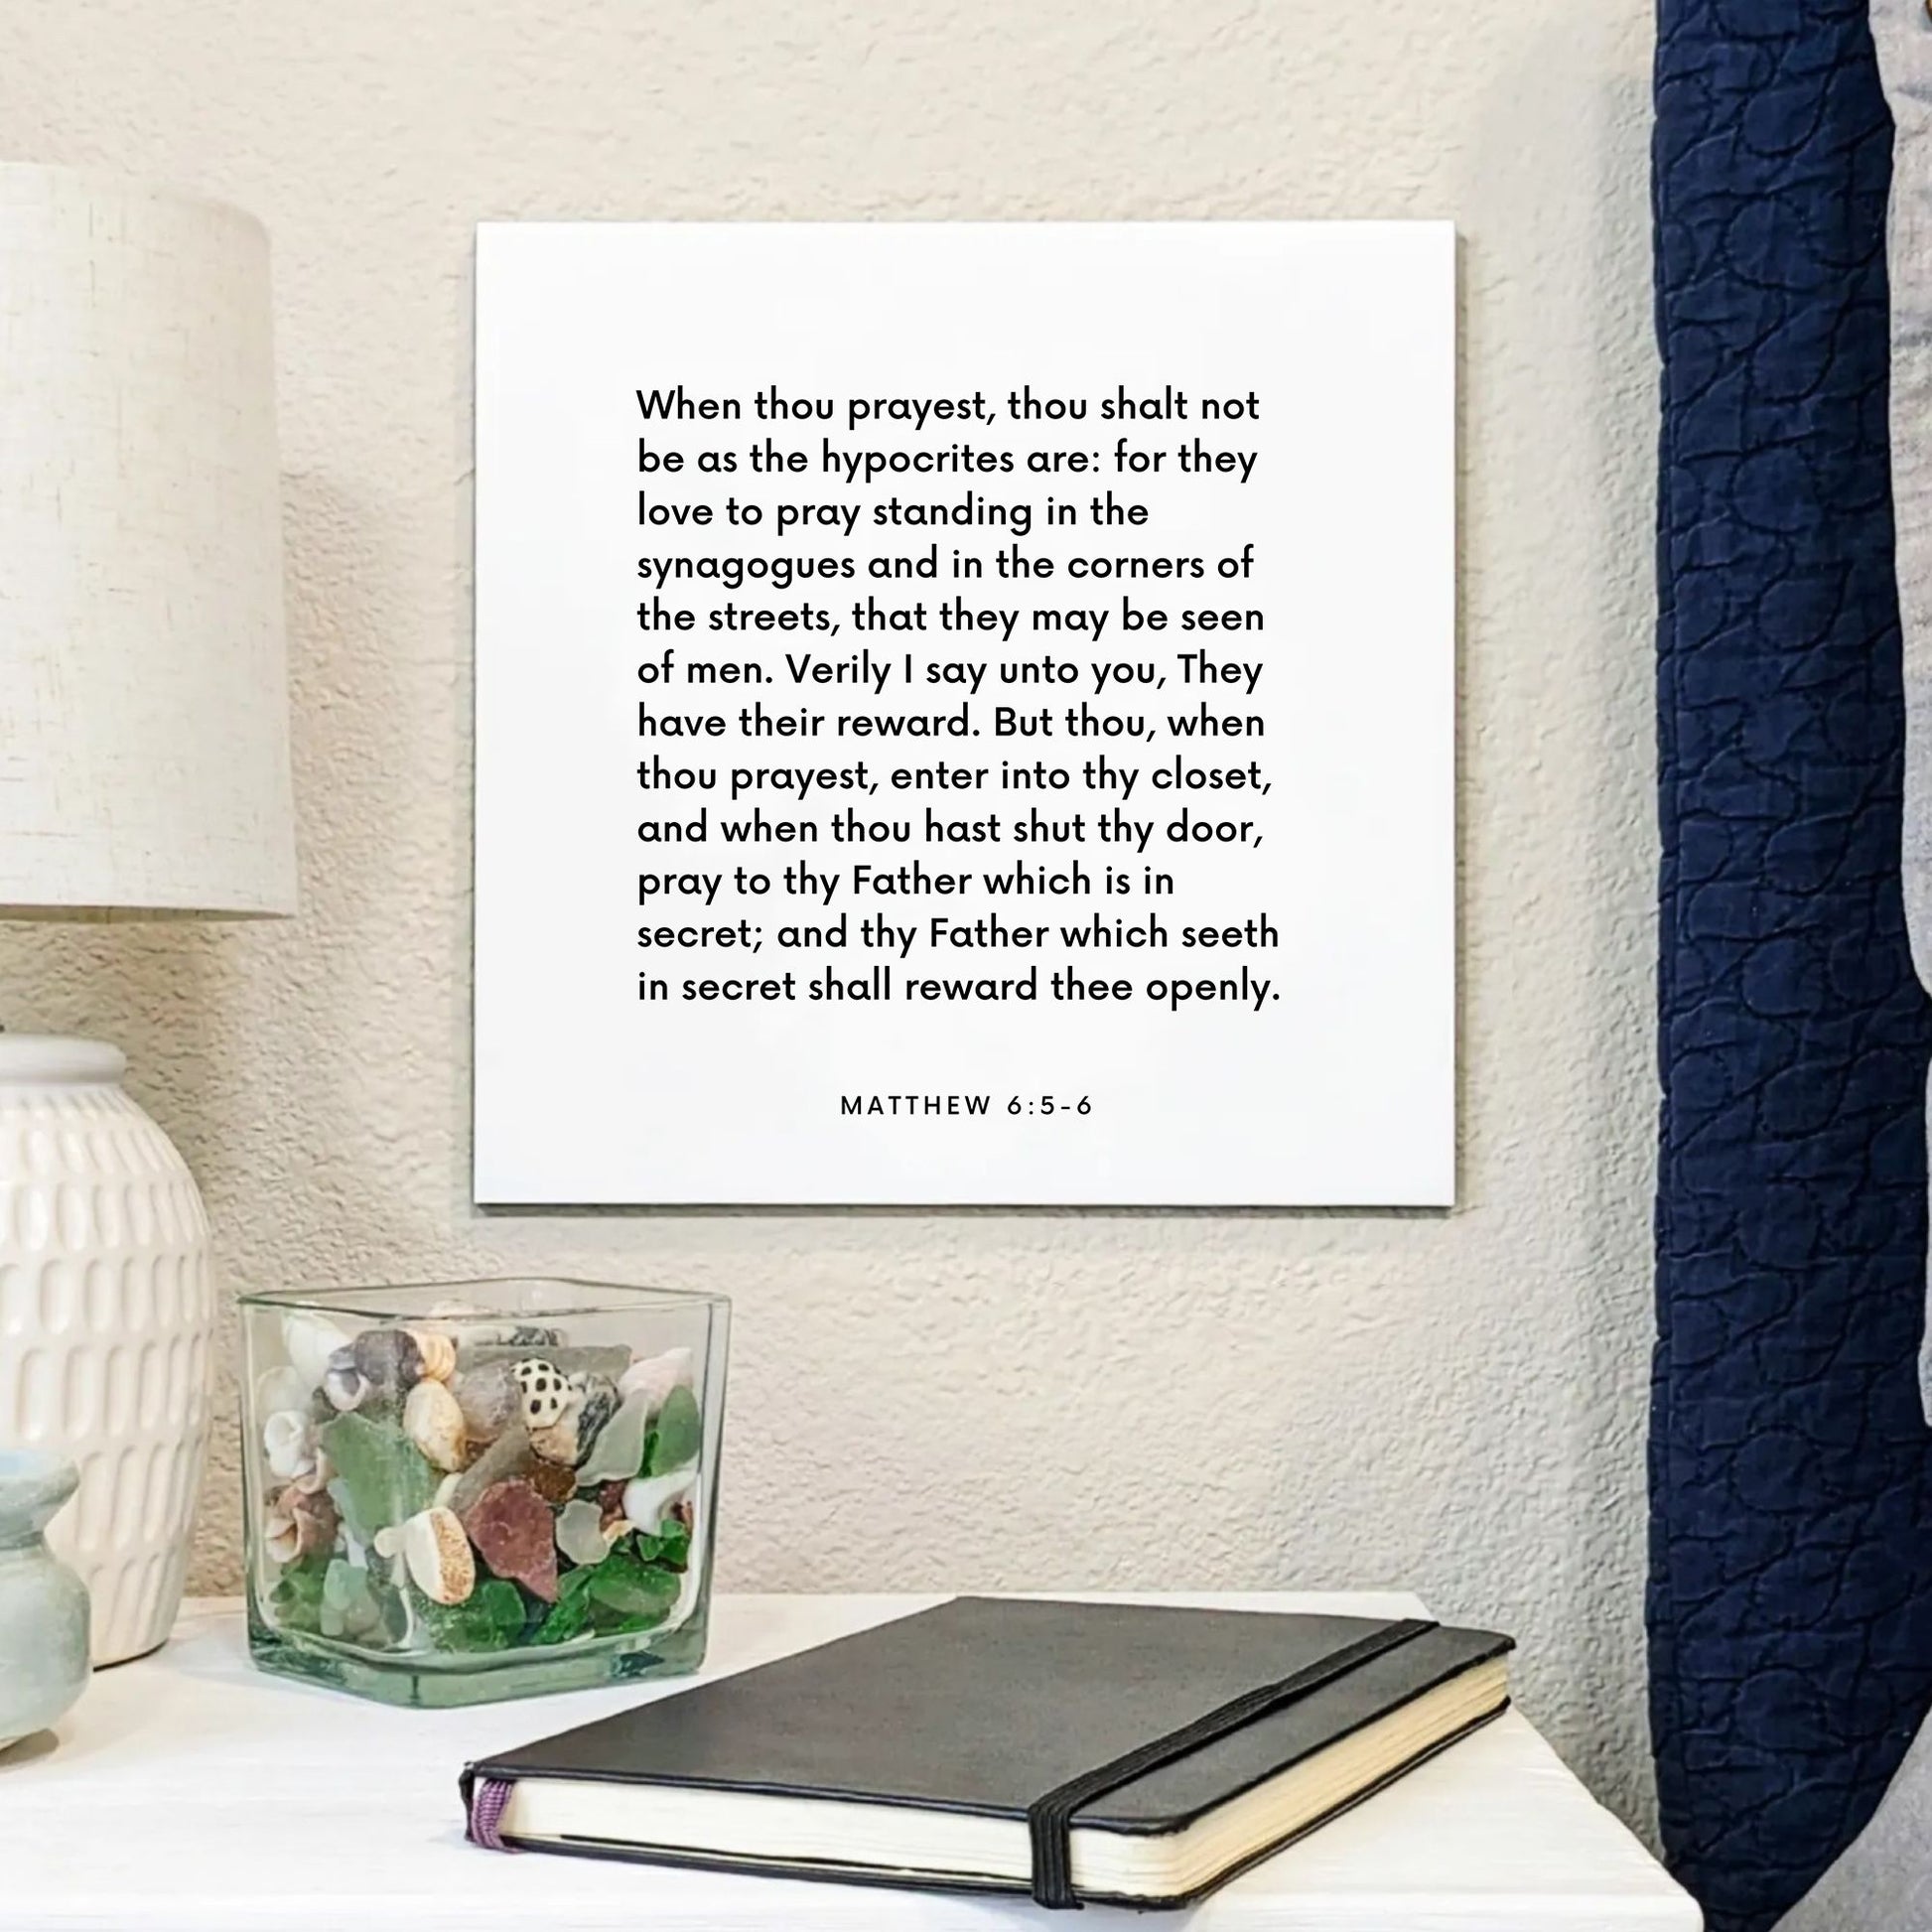 Bedside mouting of the scripture tile for Matthew 6:5-6 - "When thou prayest, thou shalt not be as the hypocrites"